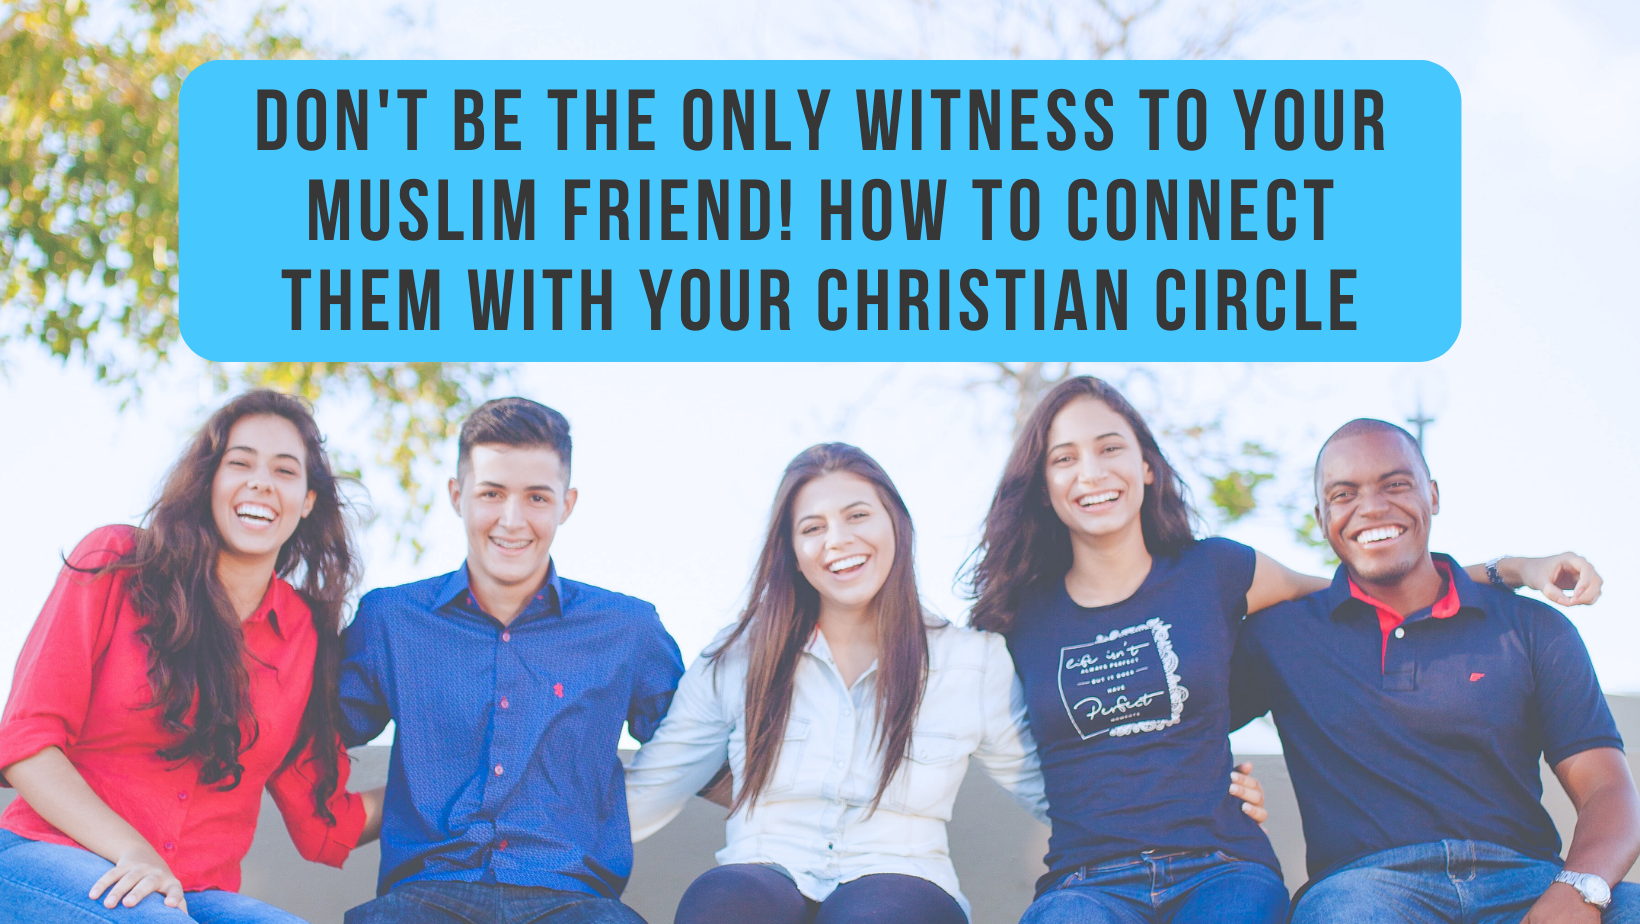 Don't be the only witness to your Muslim friend! How to connect them with your Christian circle